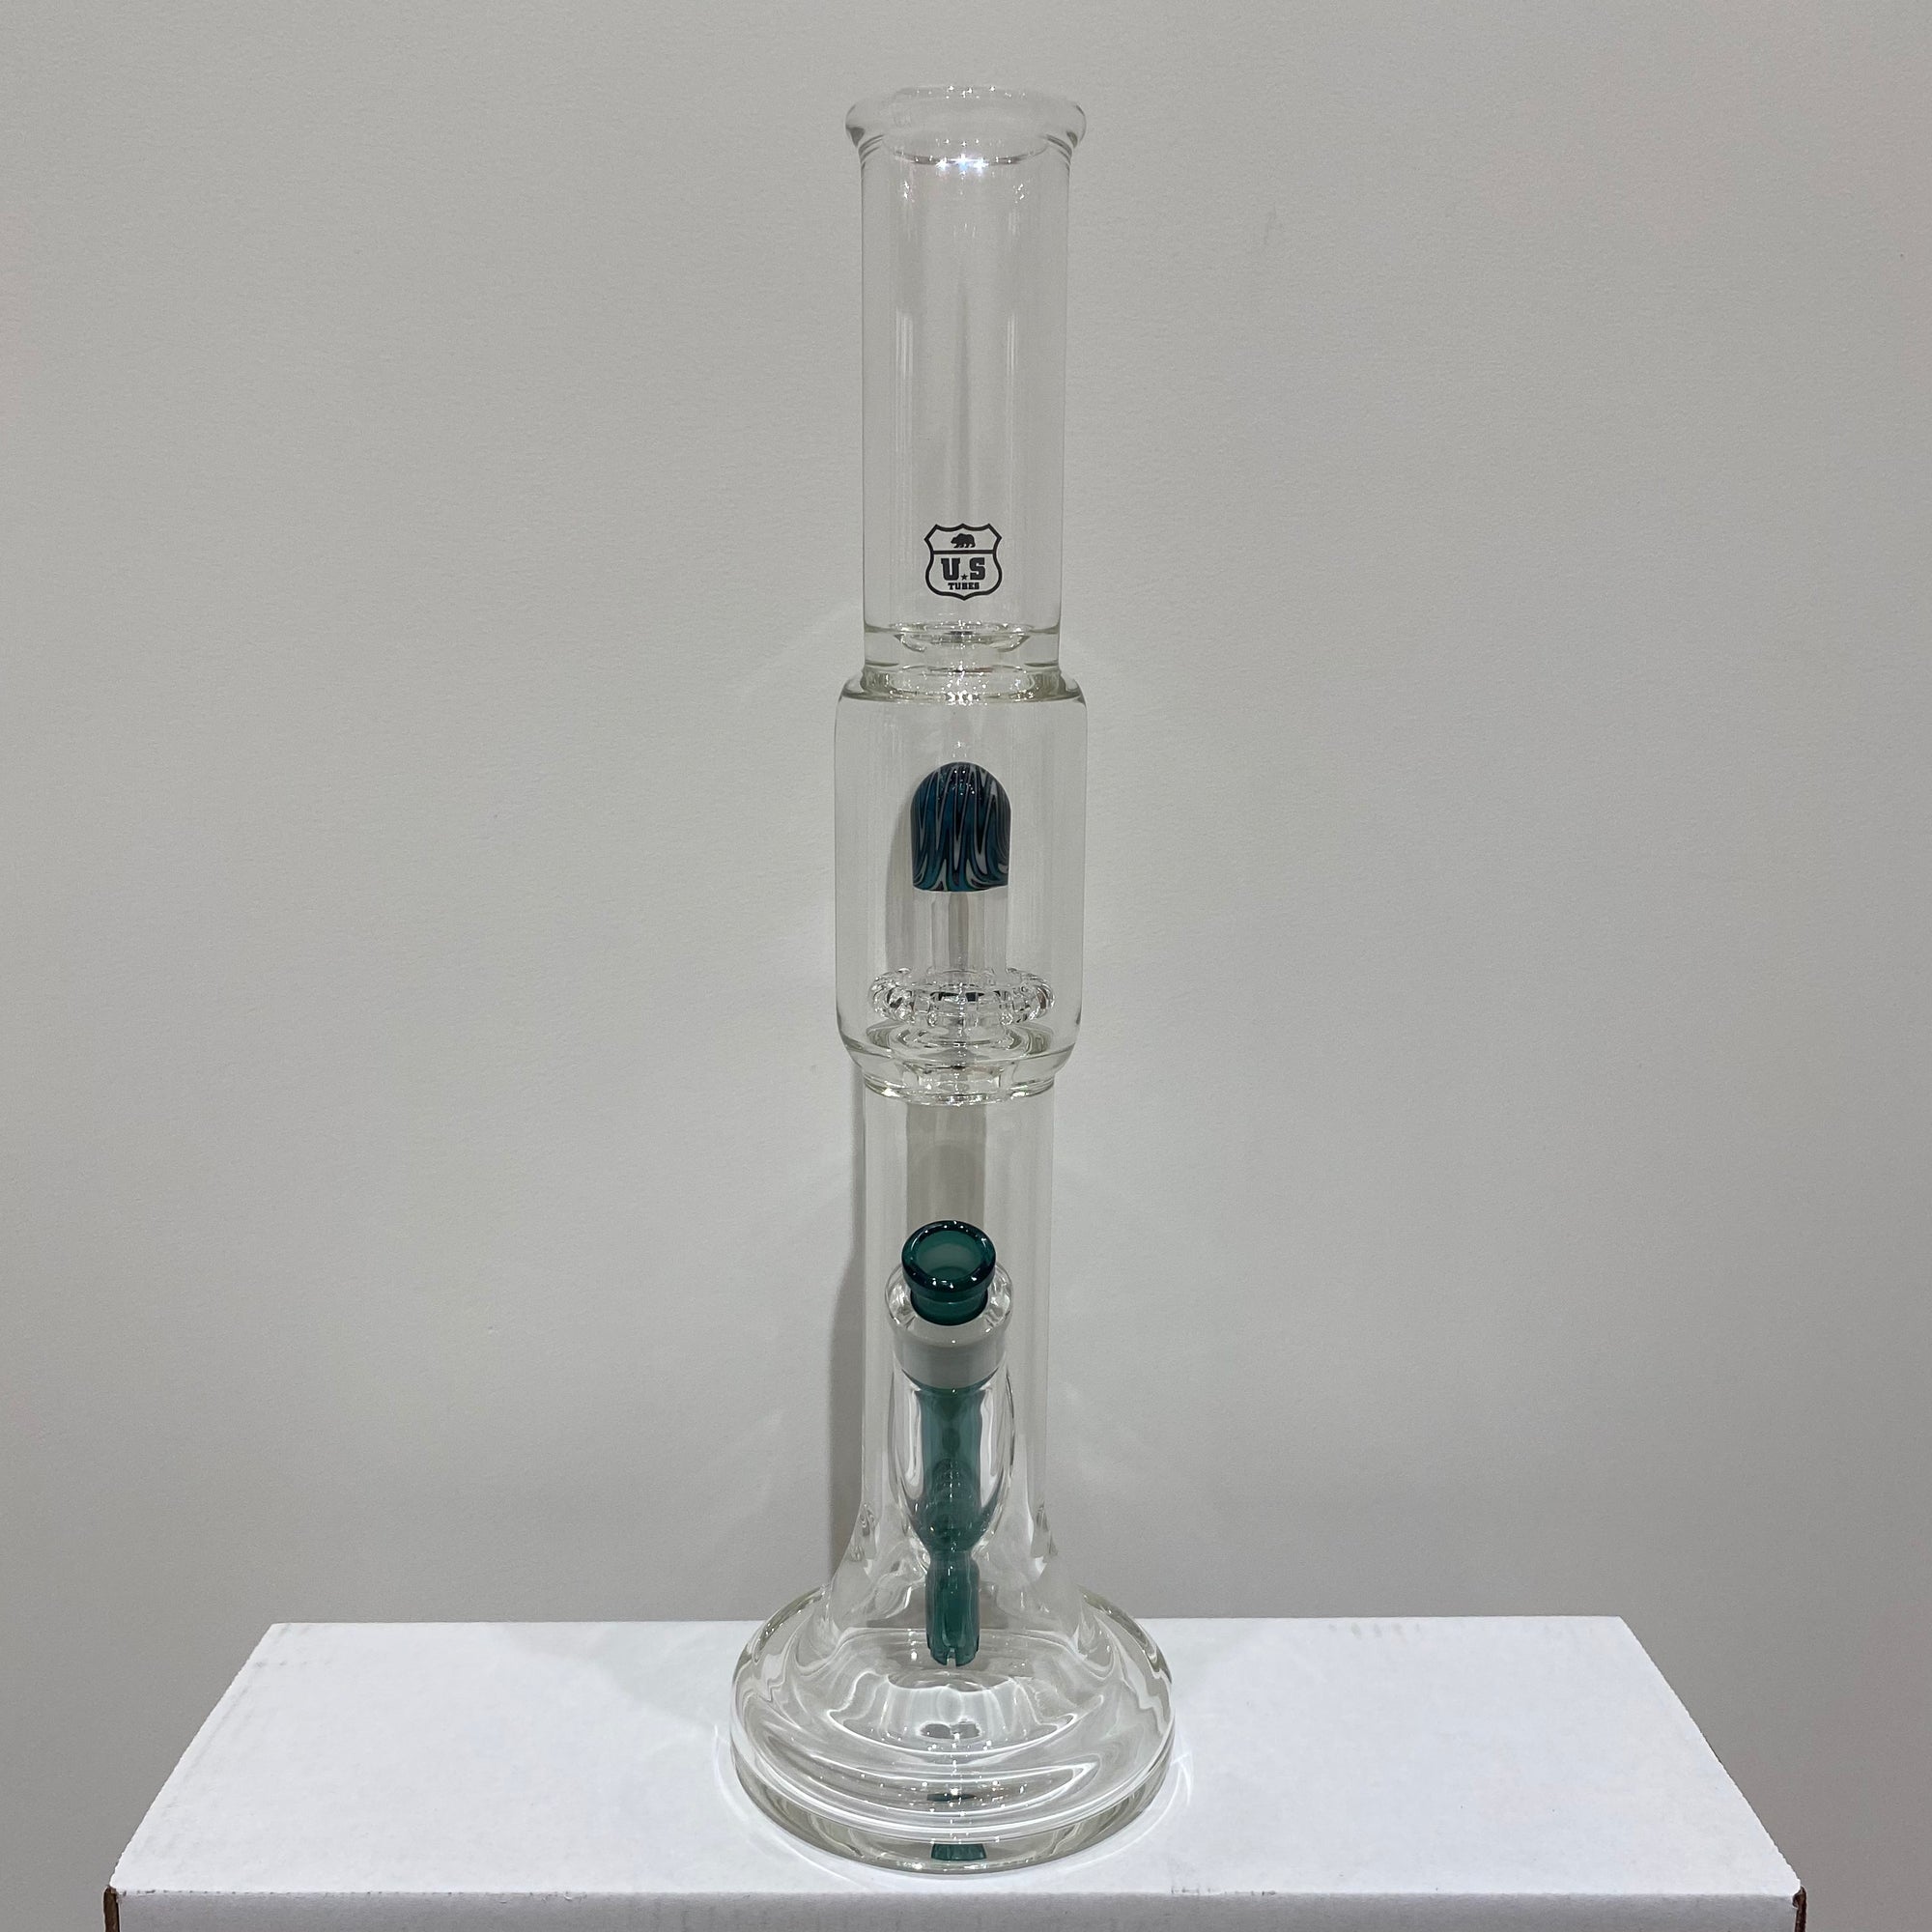 US Tubes 17 Inch Hybrid with Worked Circ Percolator 50 x 5mm and 19mm Joint